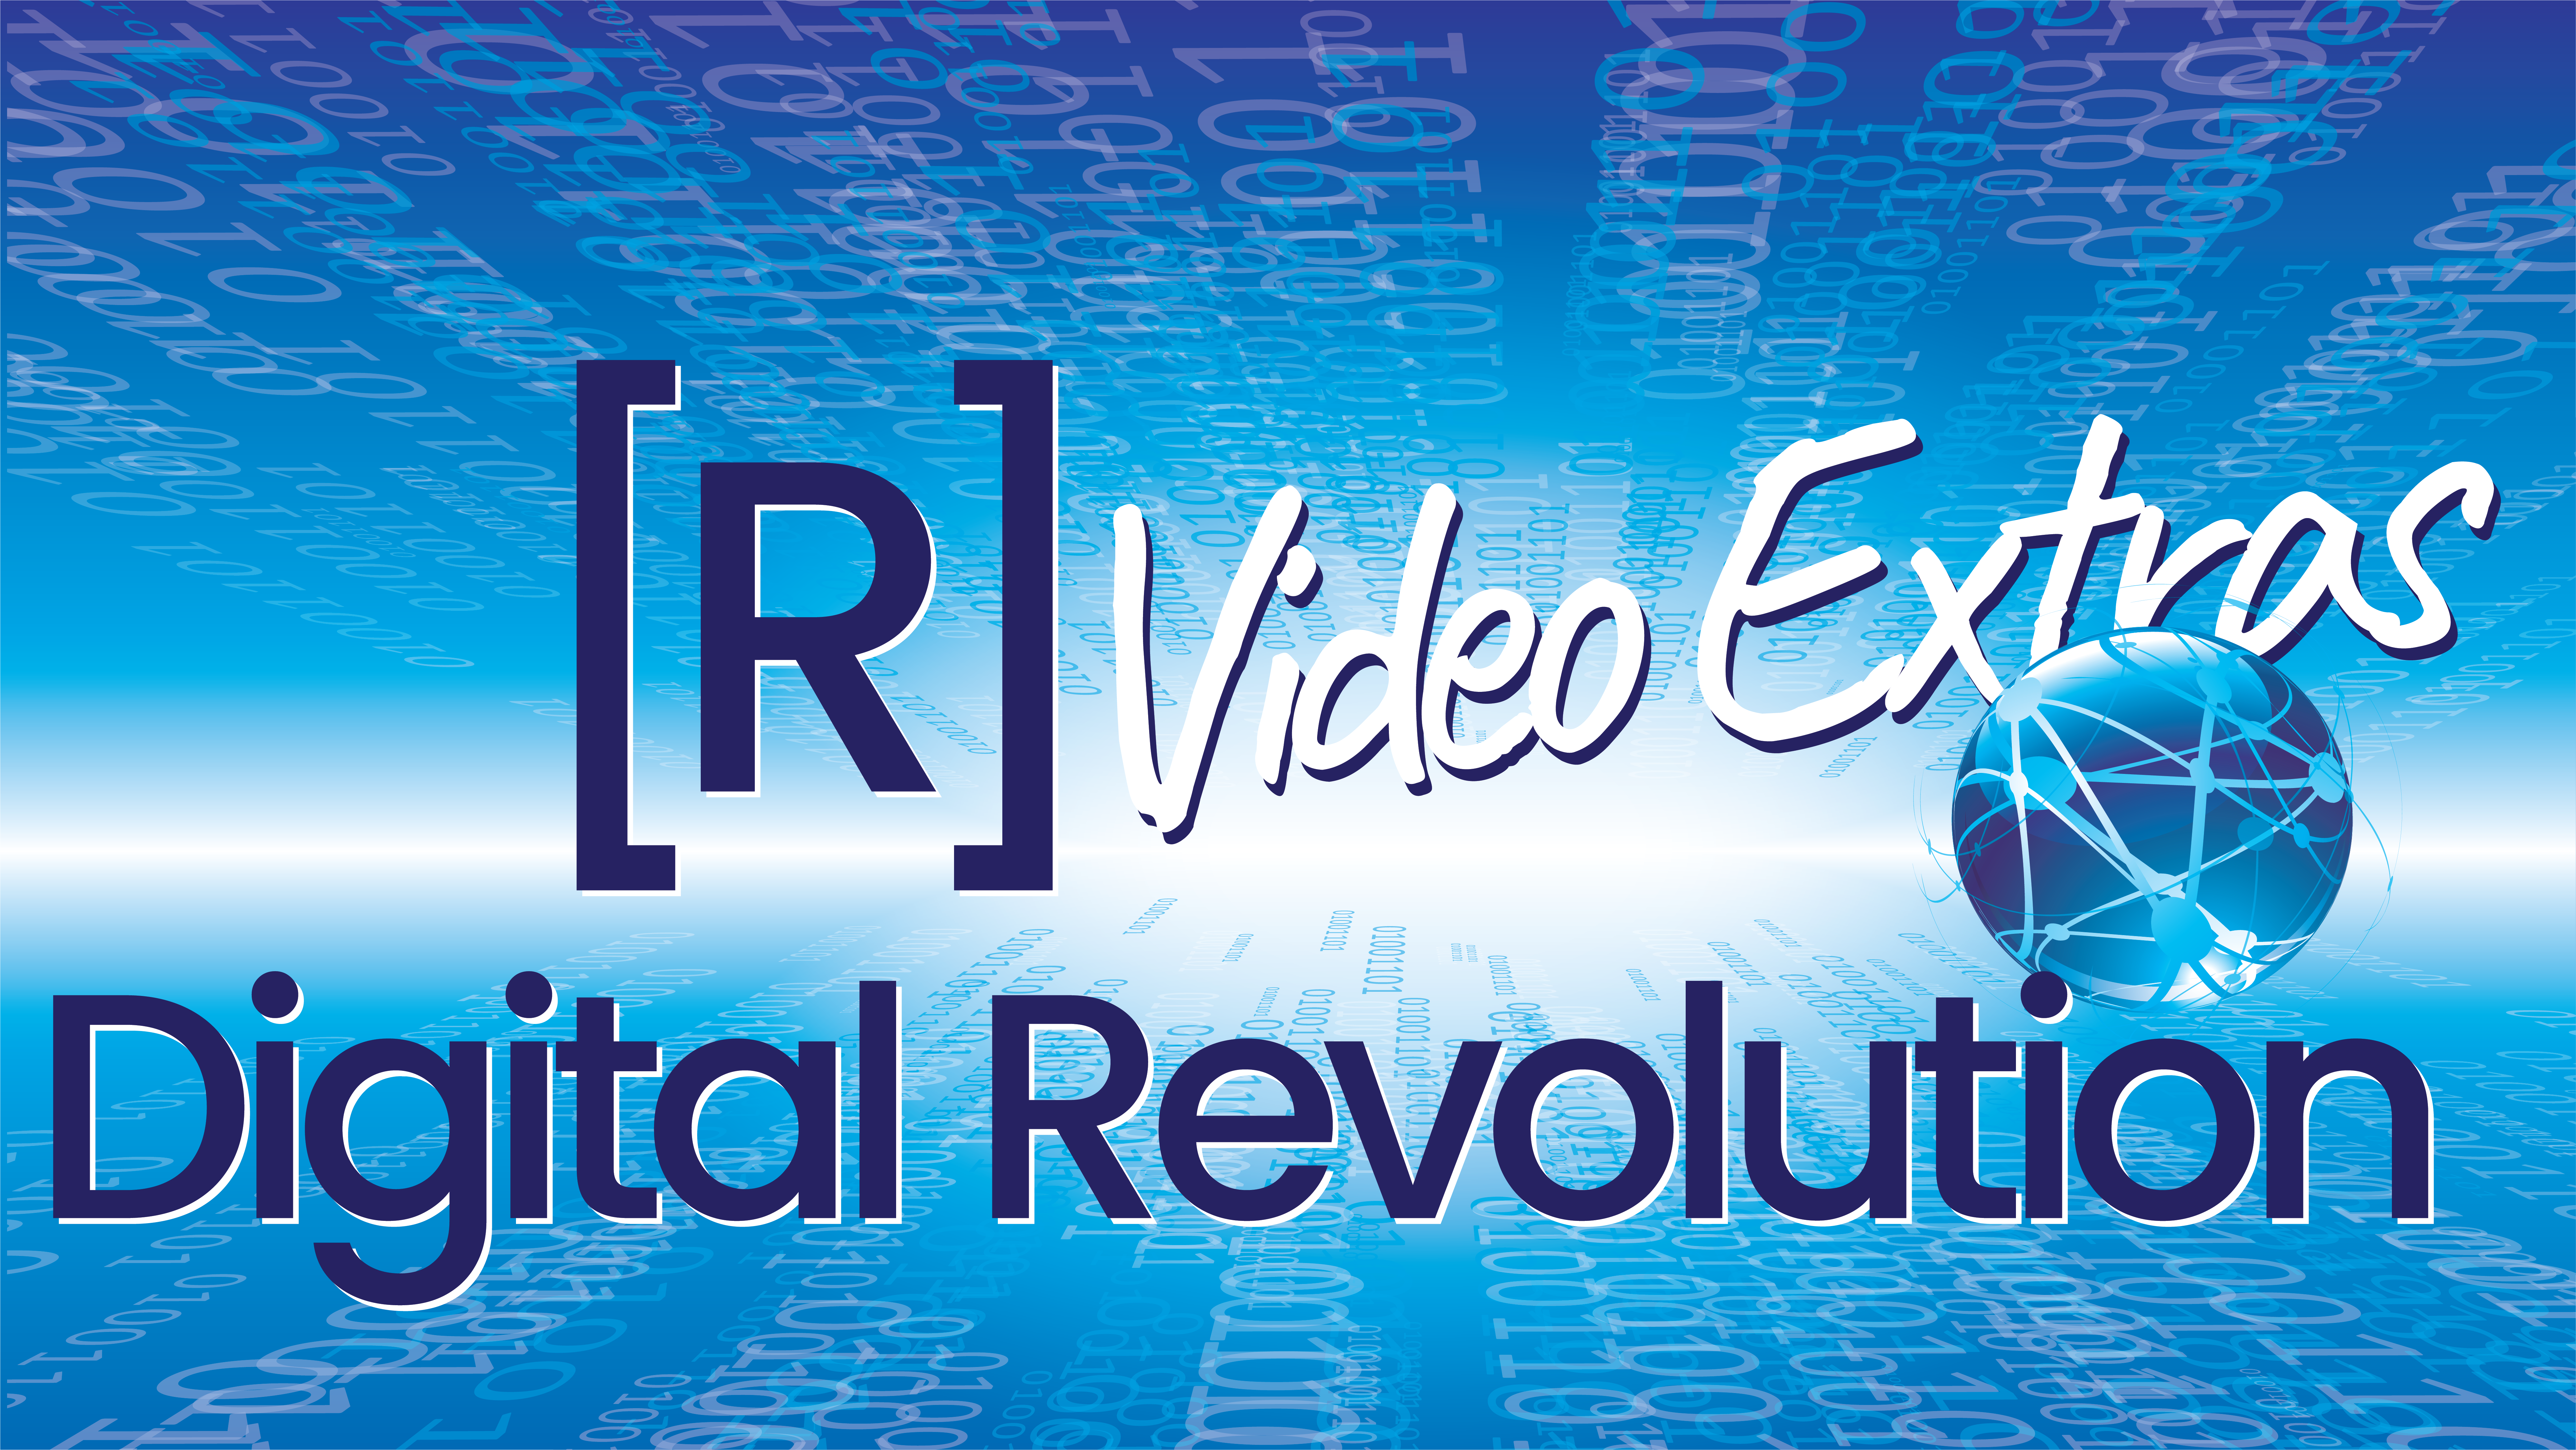 Blue globe on a technological background promoting the digital revolution podcast video extra series.